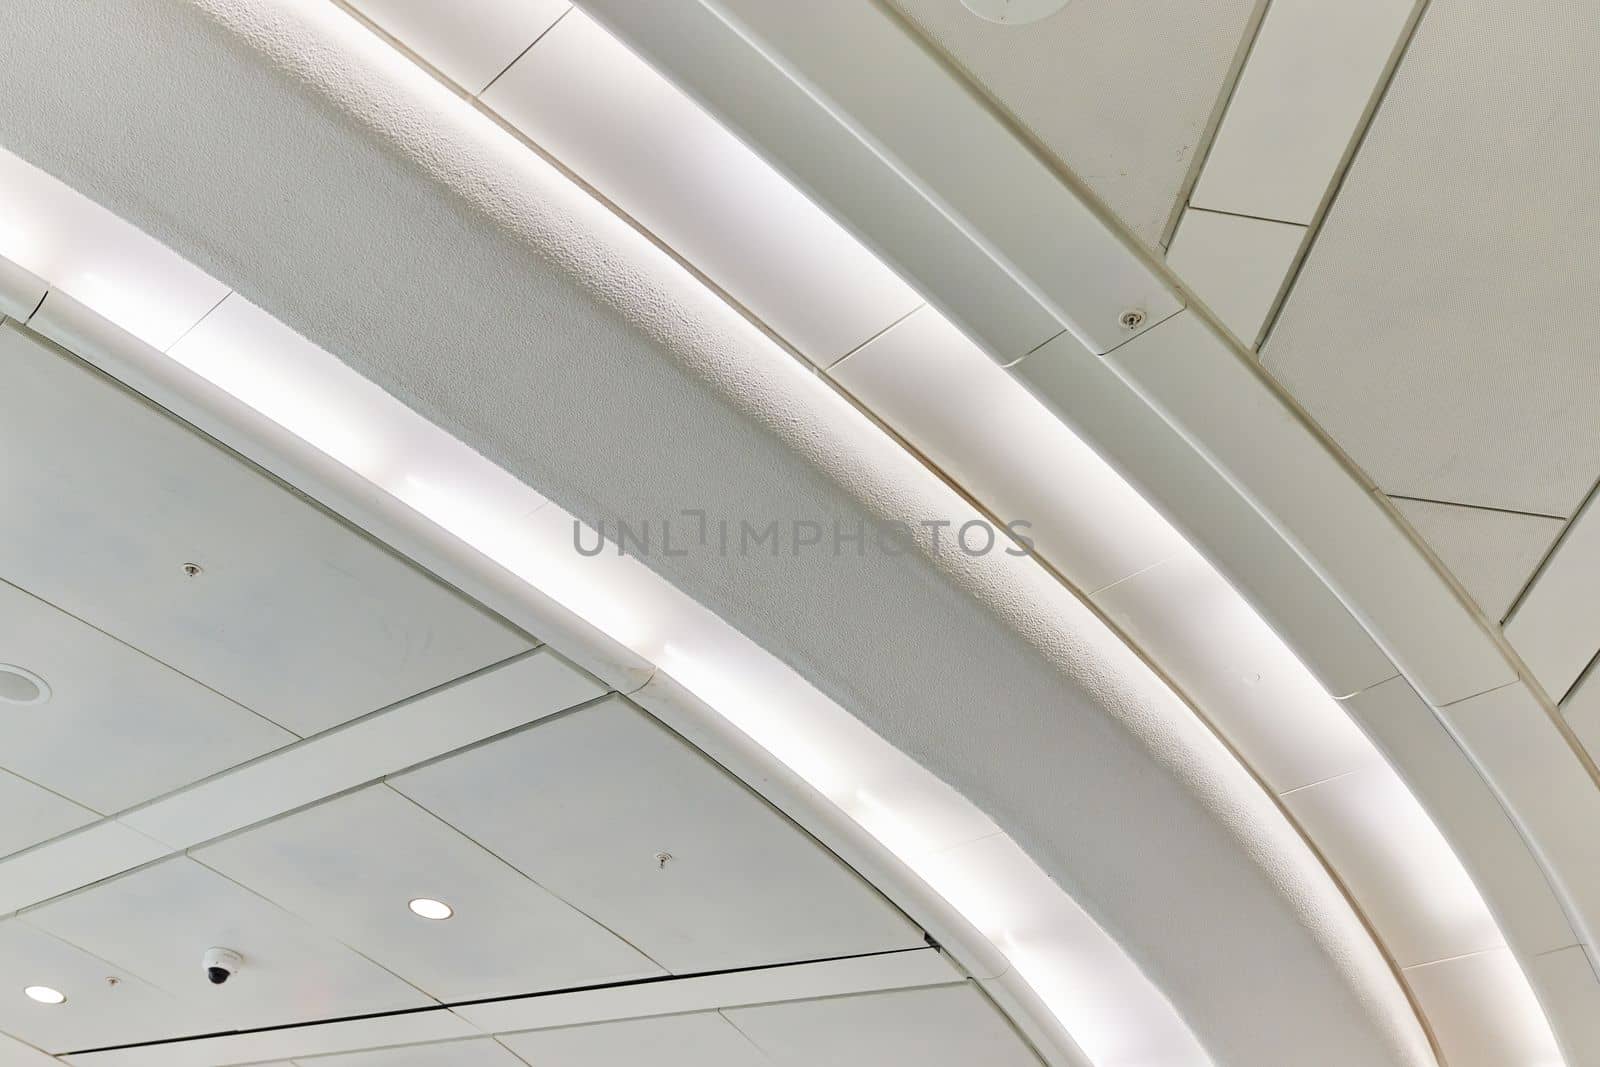 Detail patch of clean modern white interior architecture in New York City ceiling by njproductions